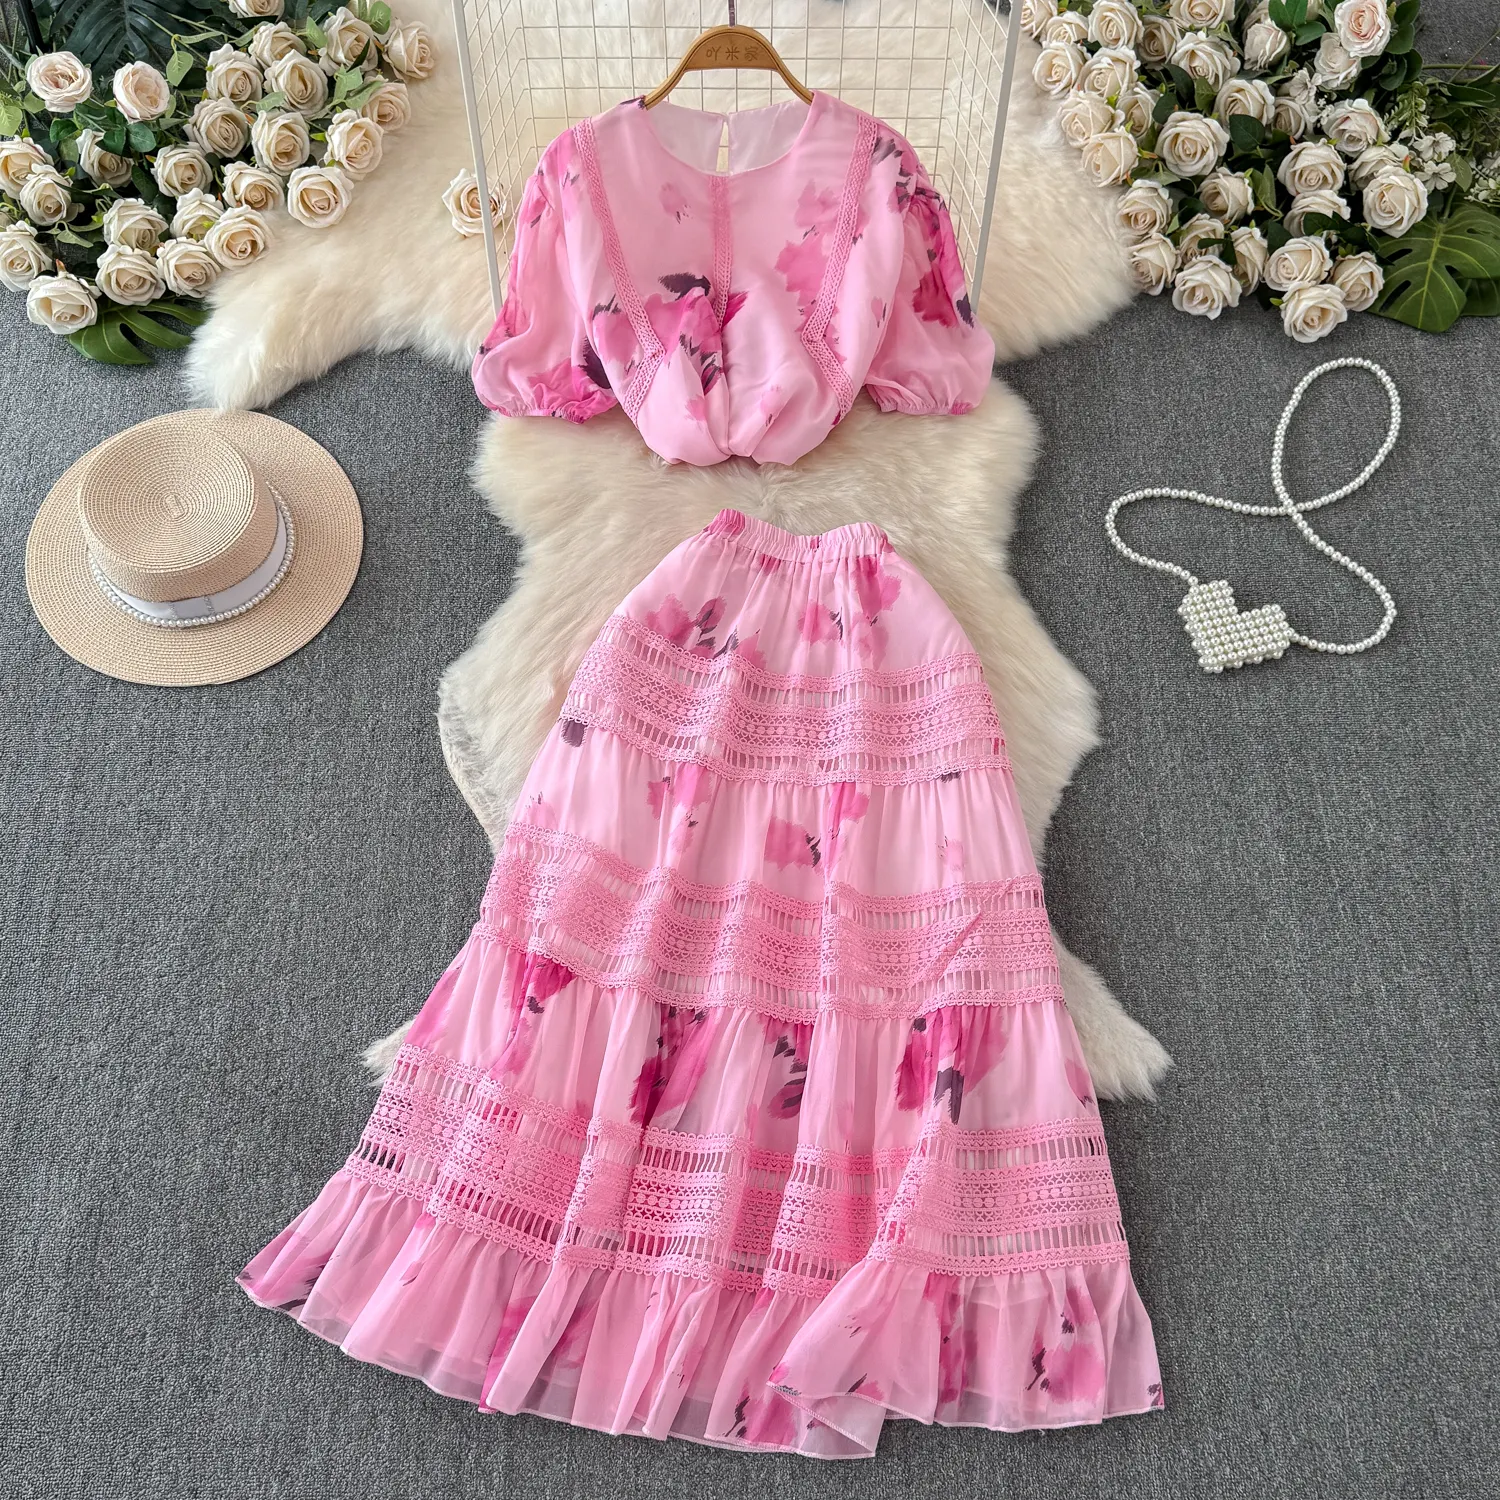 LE4250 Ladies High-Grade Embroidery Set Printed Short Sleeve Top + Gentle Wind High Waist A-Line Skirt Long Skirt Lady Suit